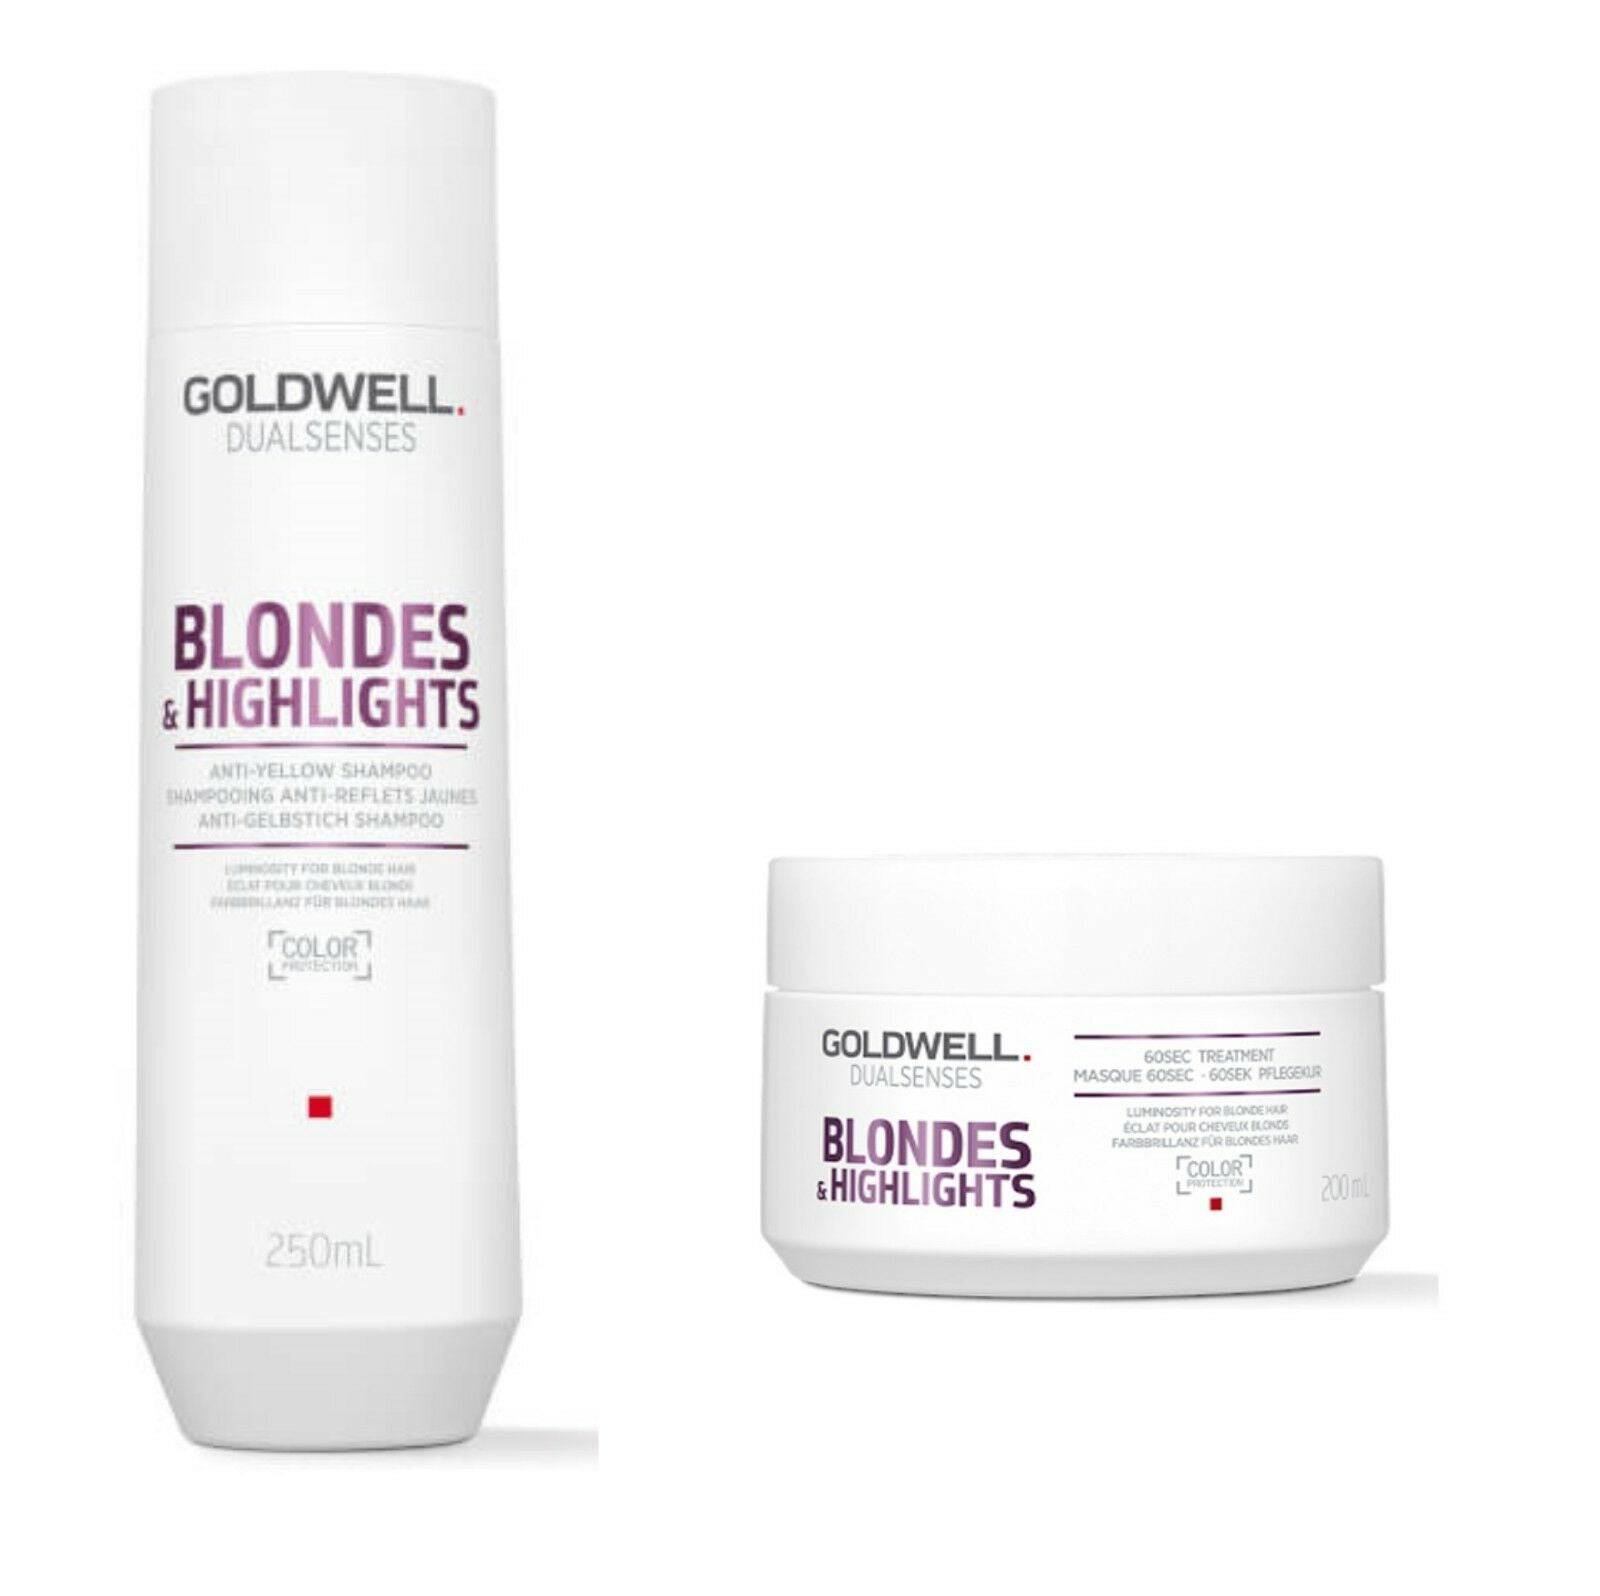 Goldwell Blondes & Highlights Anti Yellow Brassiness Shampoo & Treatment Duo - On Line Hair Depot